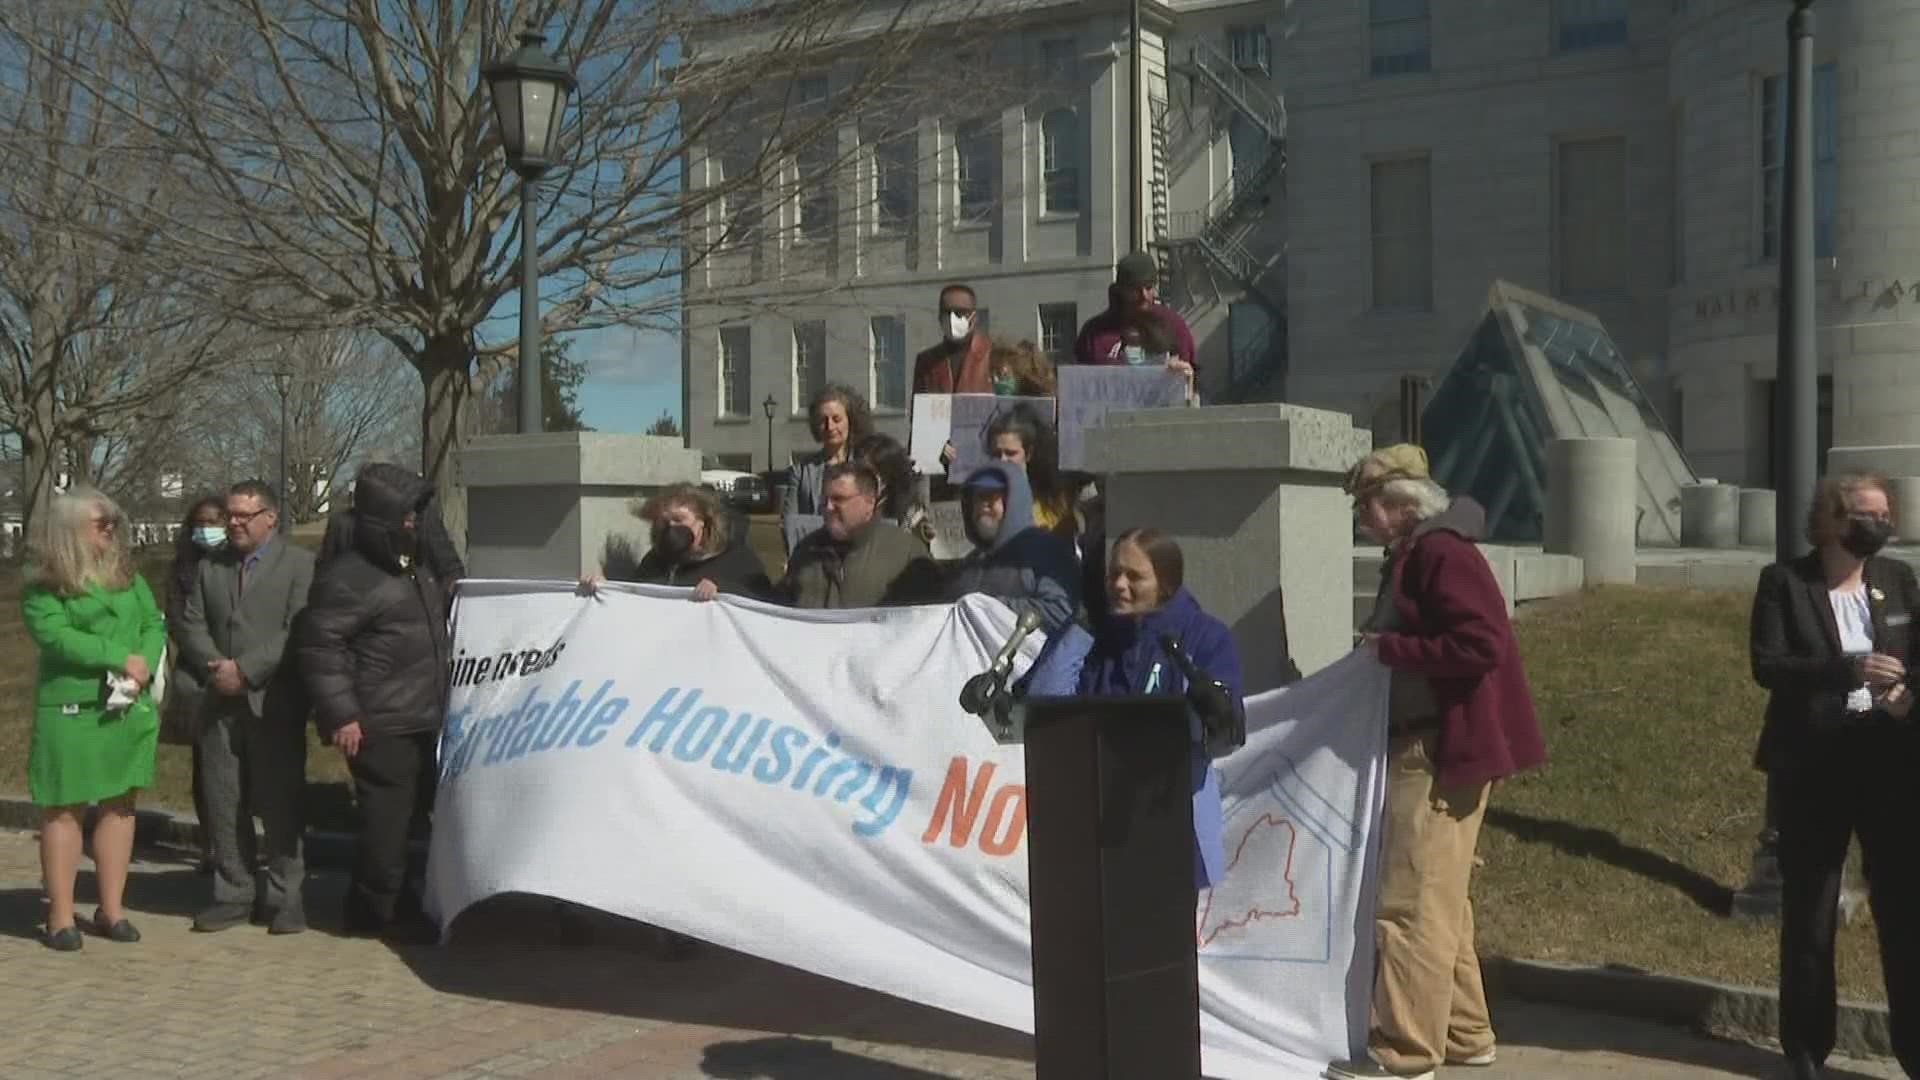 Advocates for affordable housing met with legislators outside the State House.